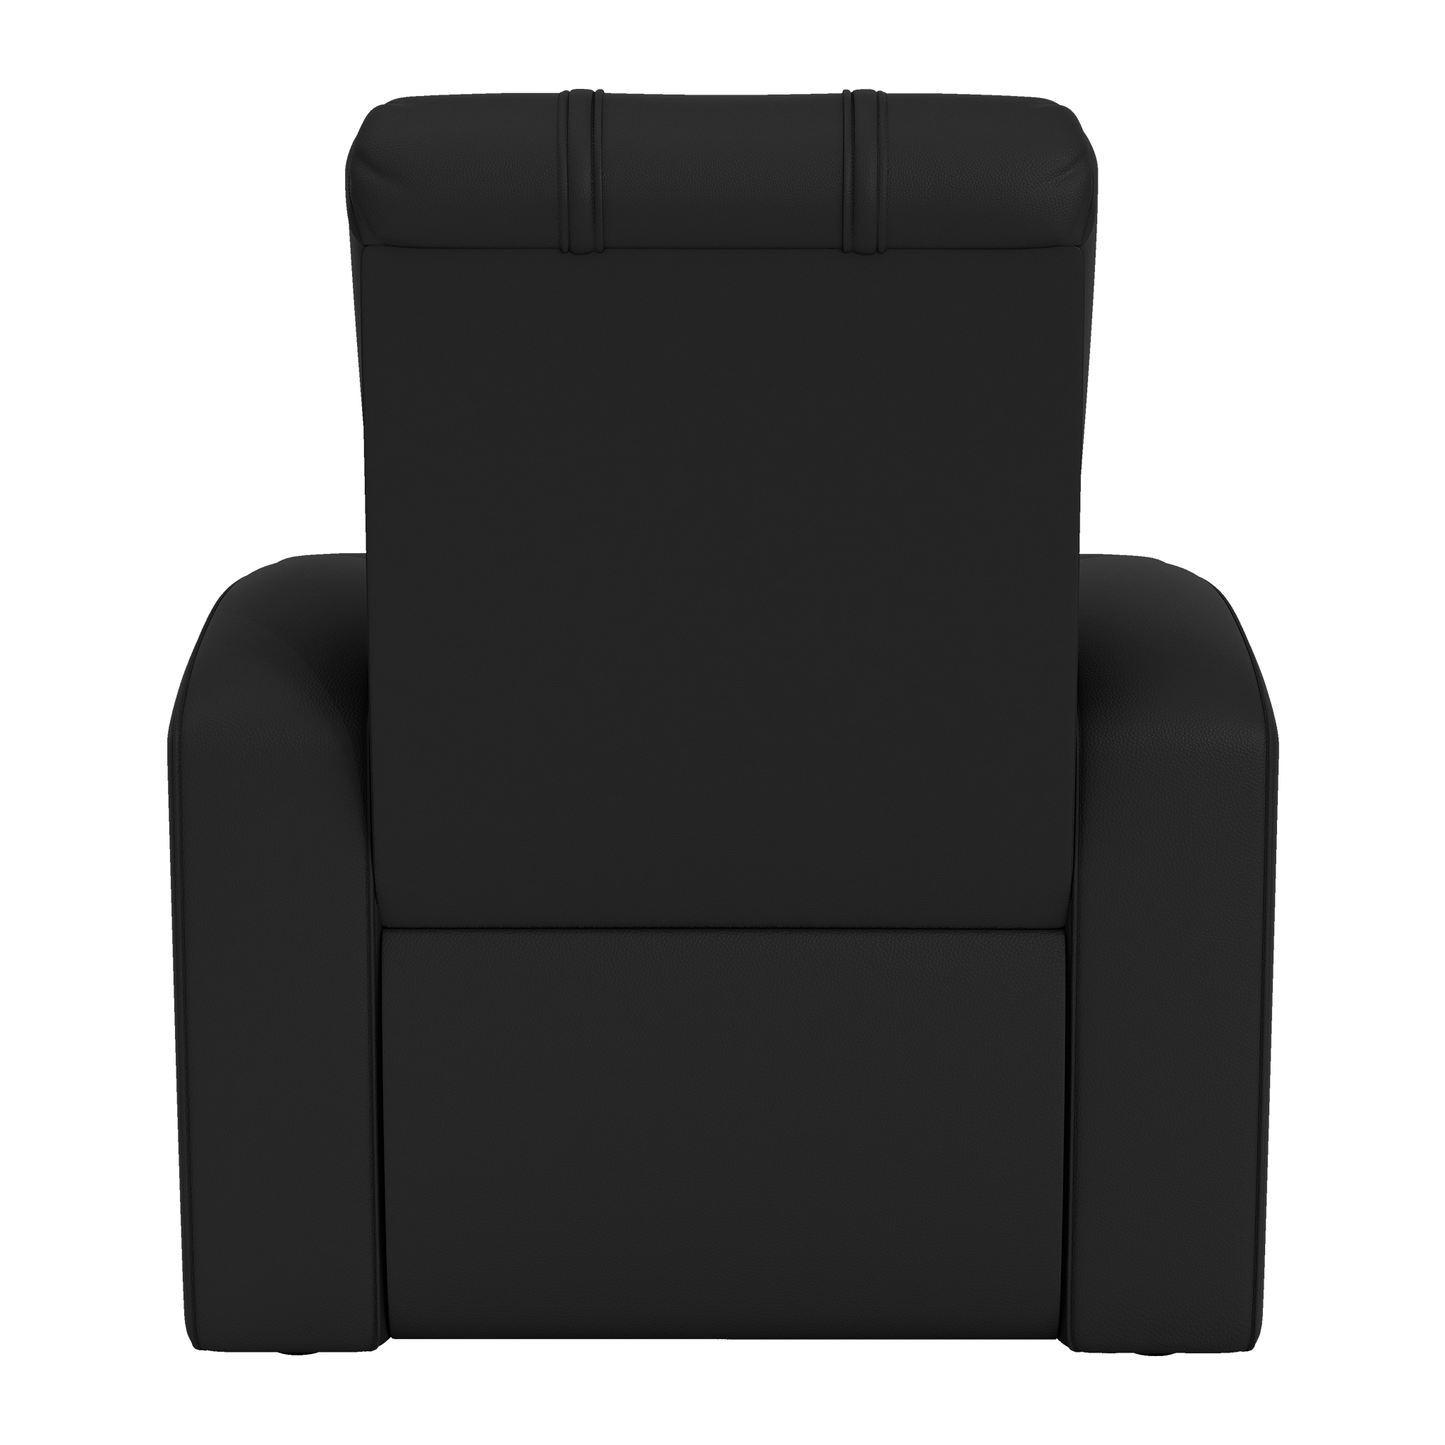 Relax Home Theater Recliner with St Louis City SC Logo